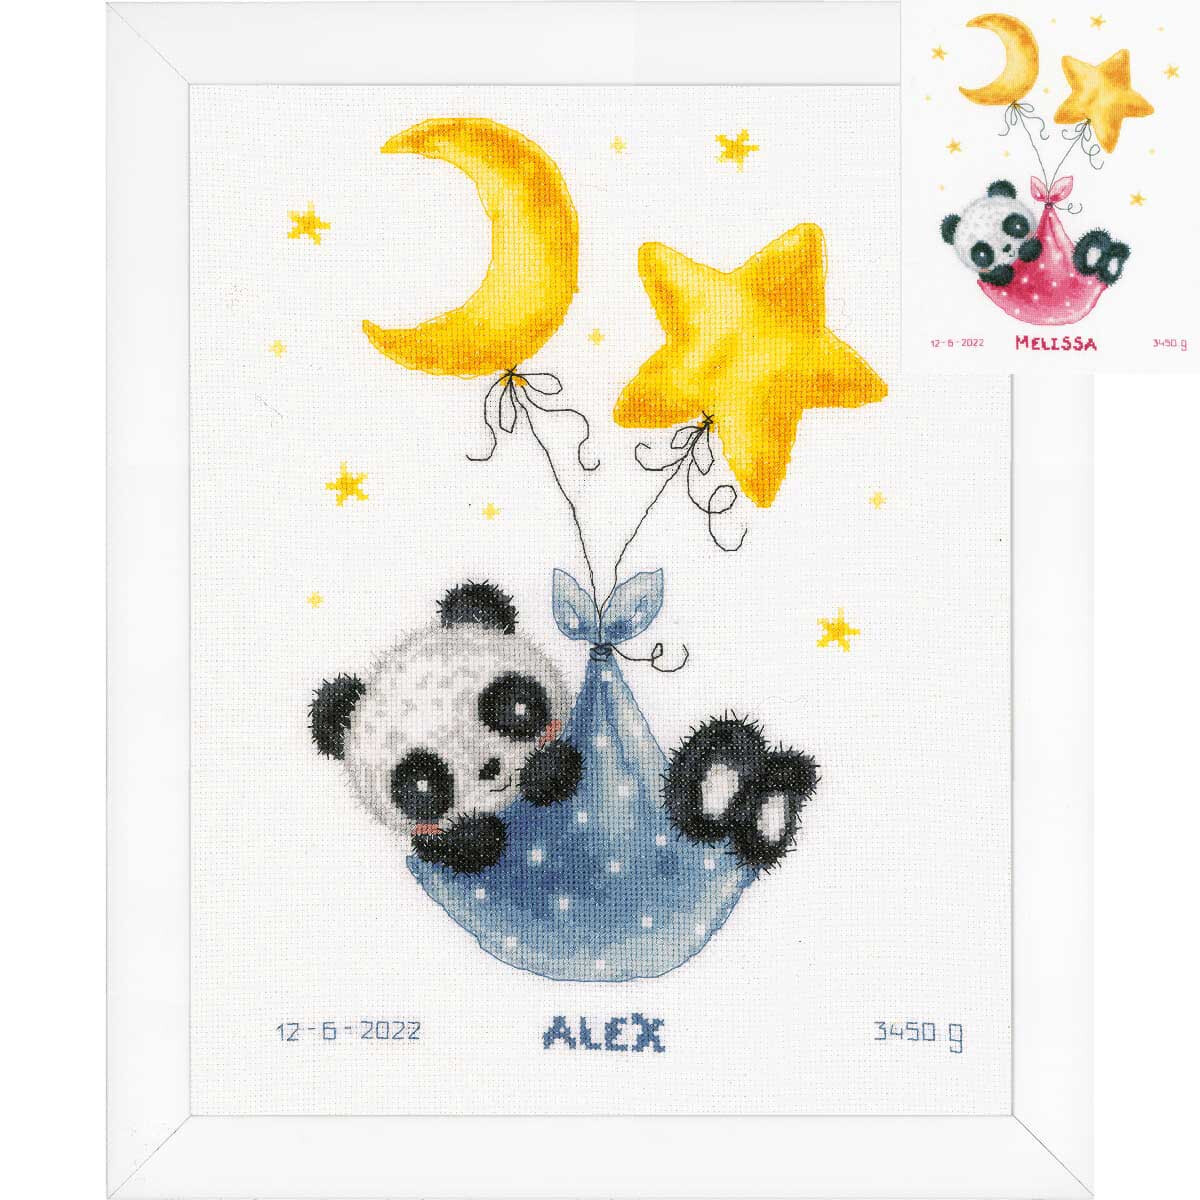 Vervaco counted cross stitch kit "Panda Bear go to...